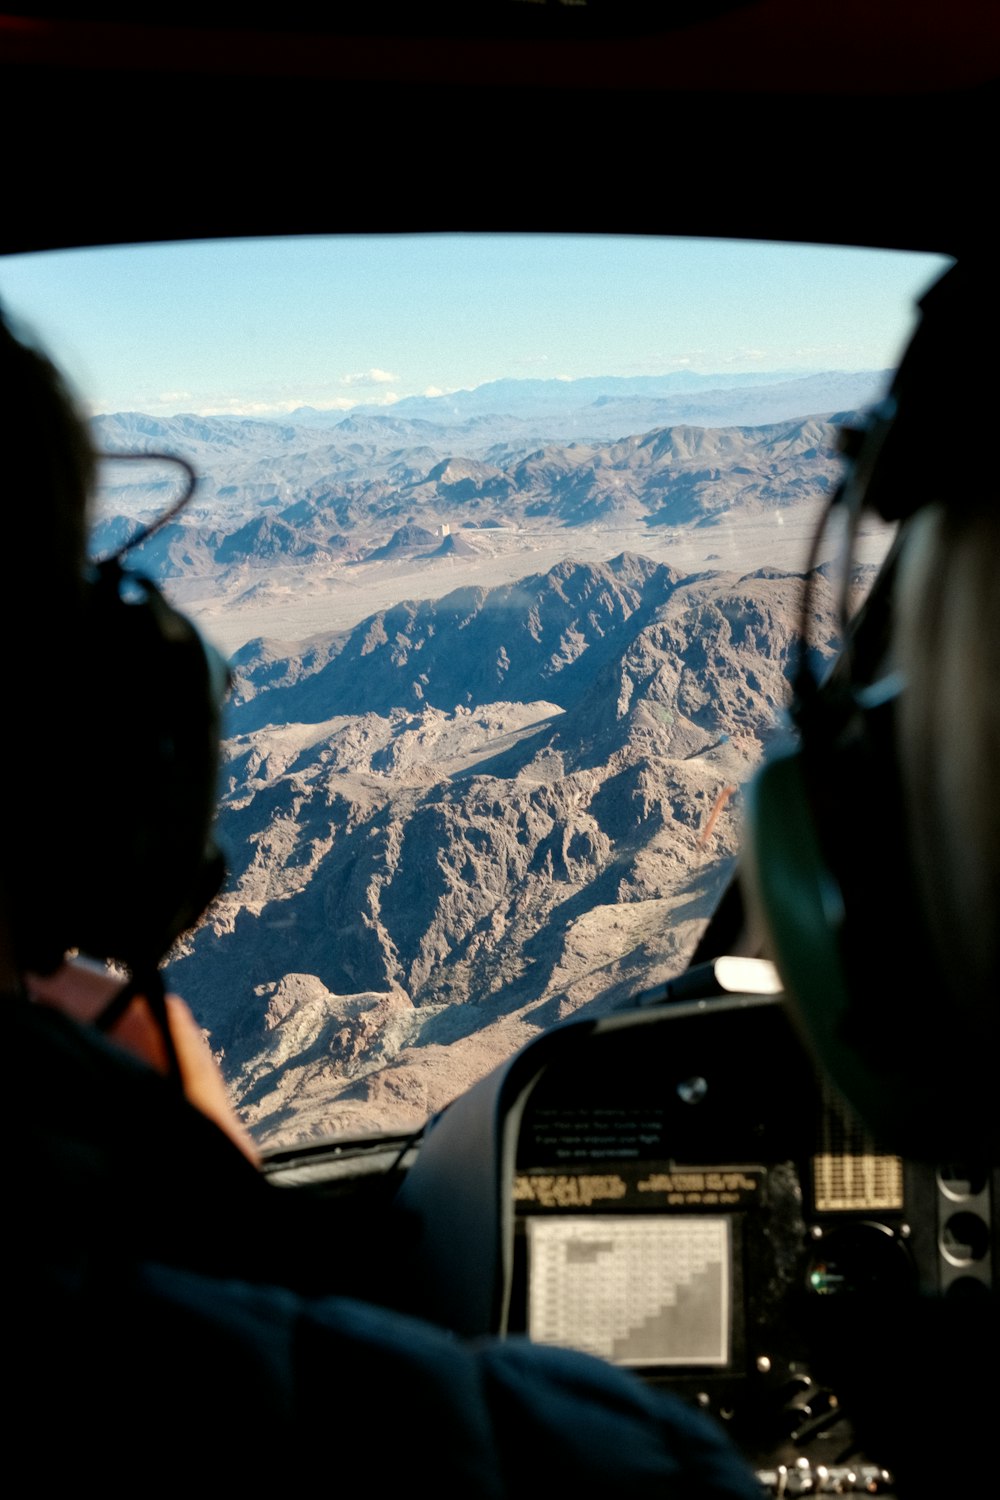 a view of a mountain range from inside a plane